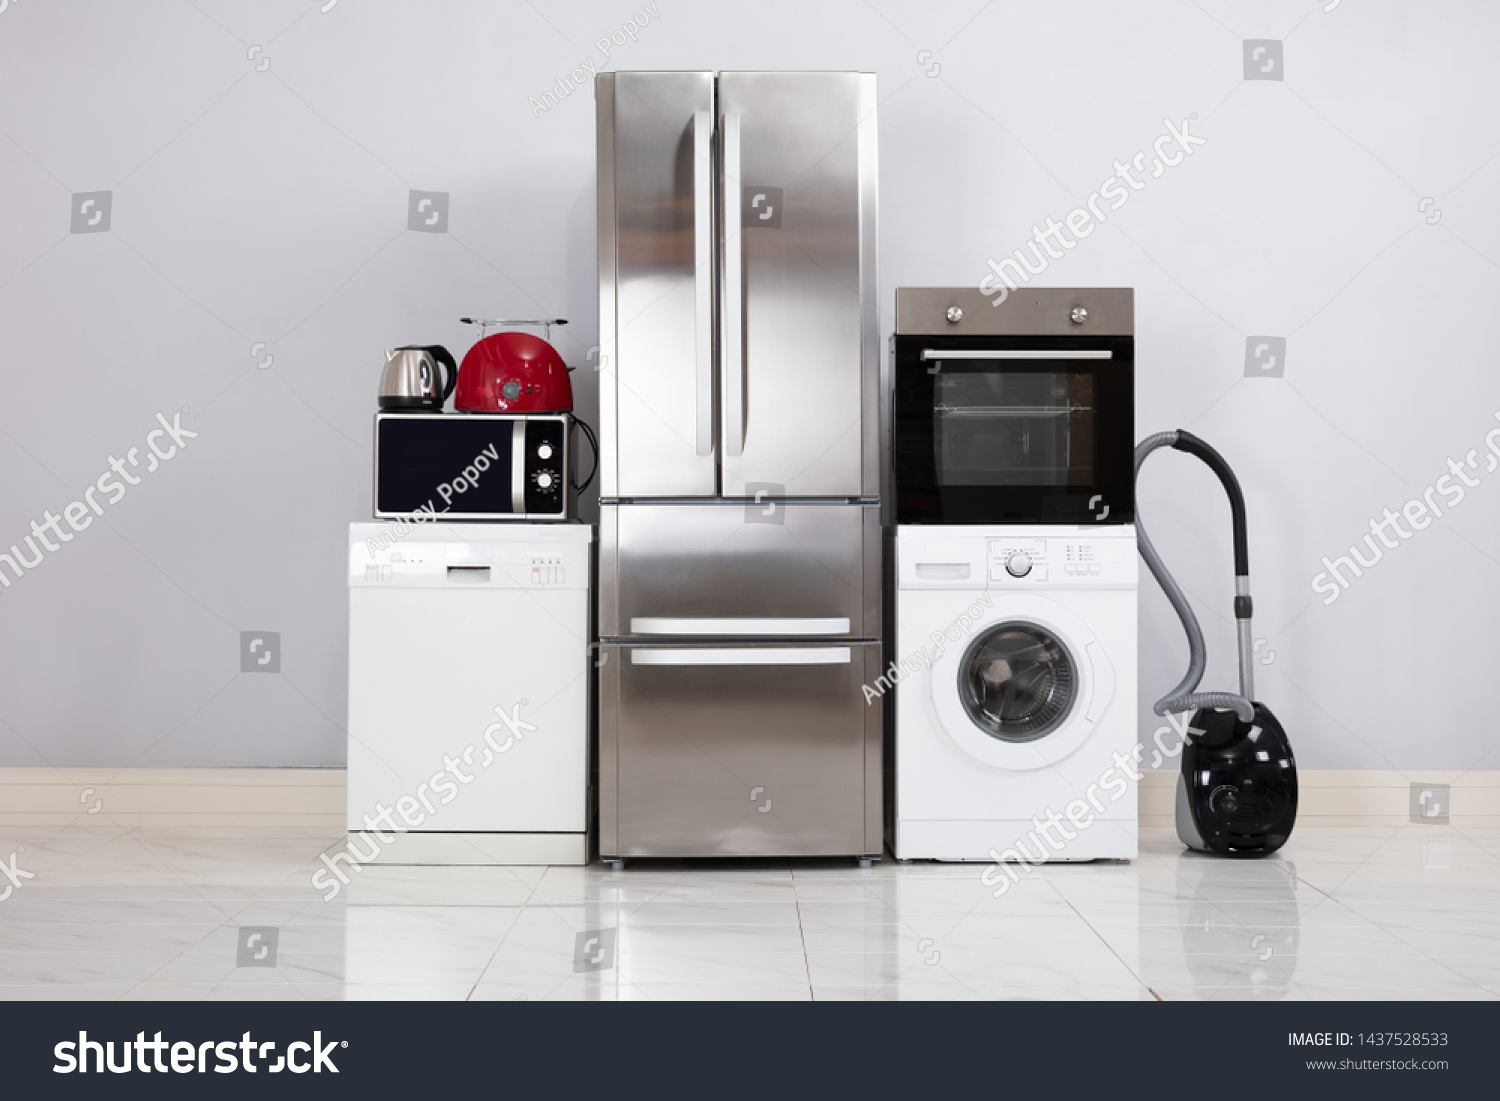 Close-up Of Home Electronic Appliances On Floor Against Grey Wall In New House #1437528533